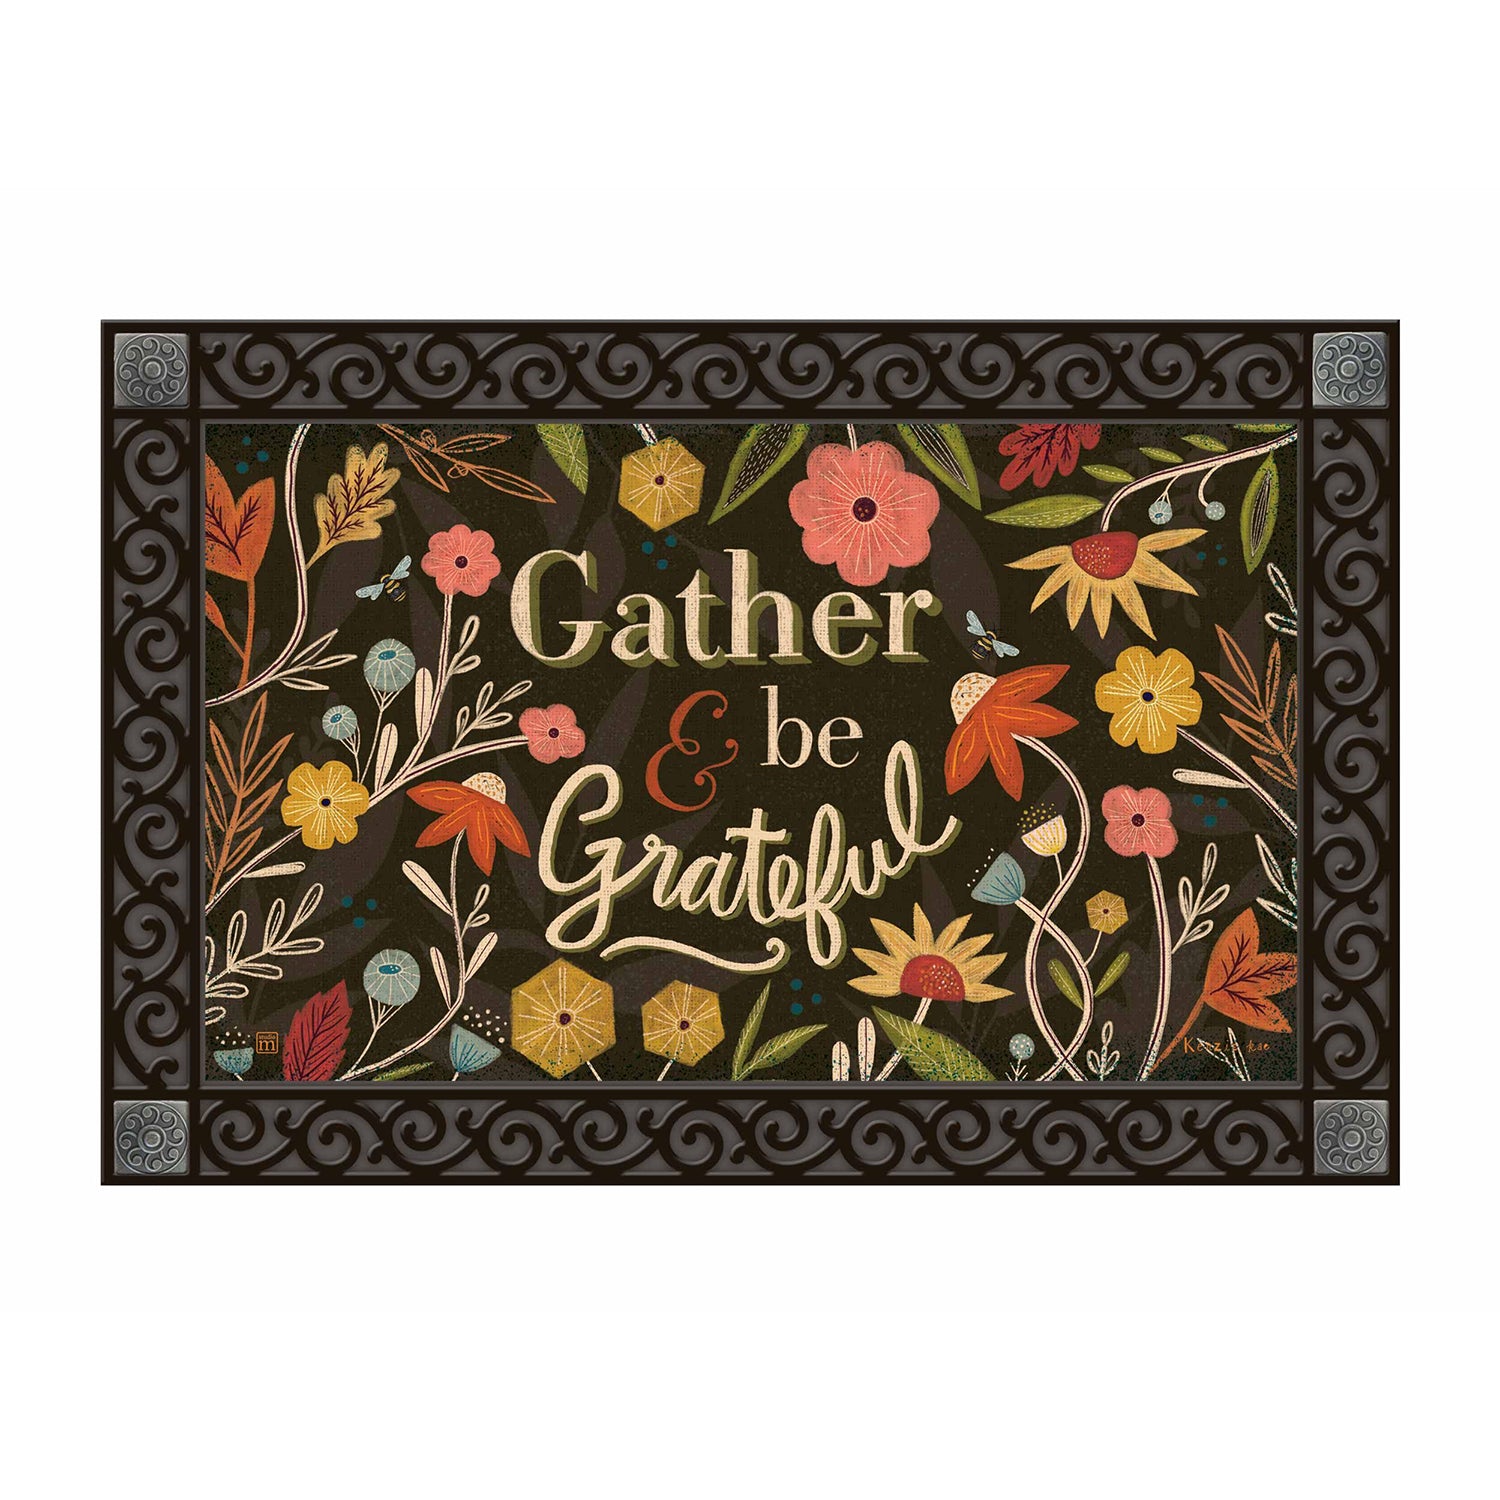 Fall Doormats| Free Shipping On All Fall Doormats At Discount